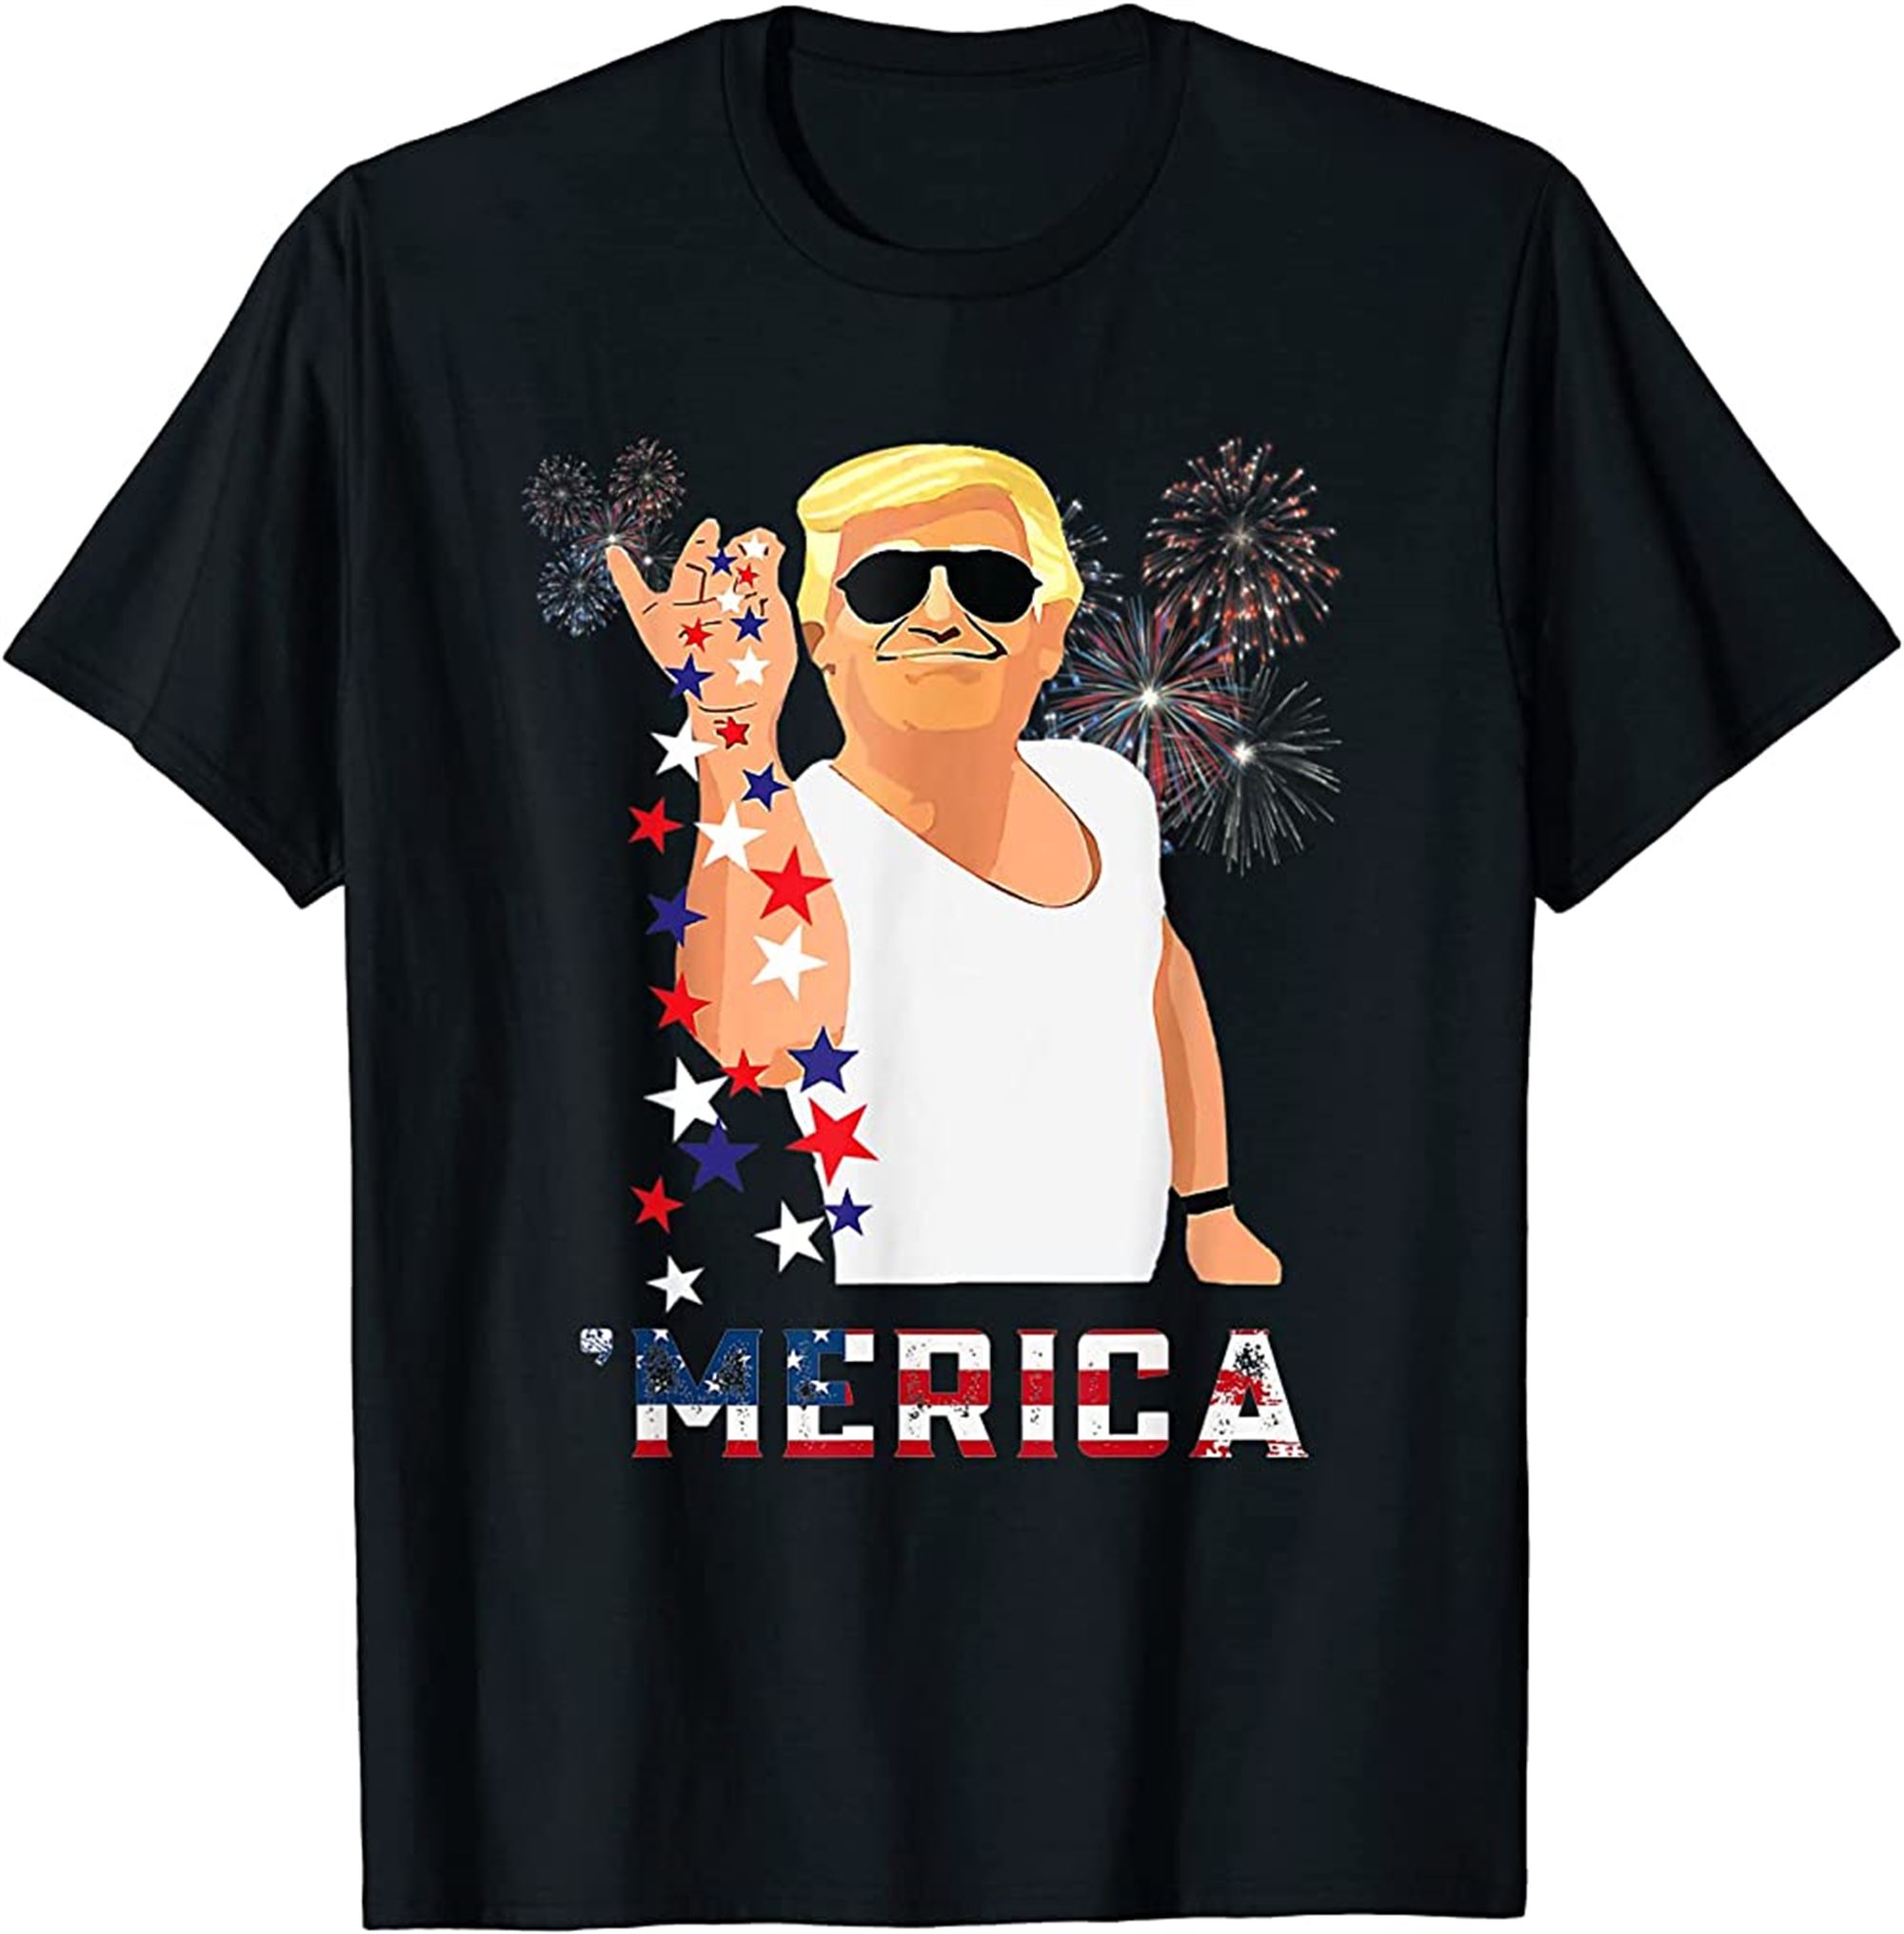 Merica Trump Outfits Don Drunk Donald Drunk 4th Of July T-shirt Full Size Up To 5xl